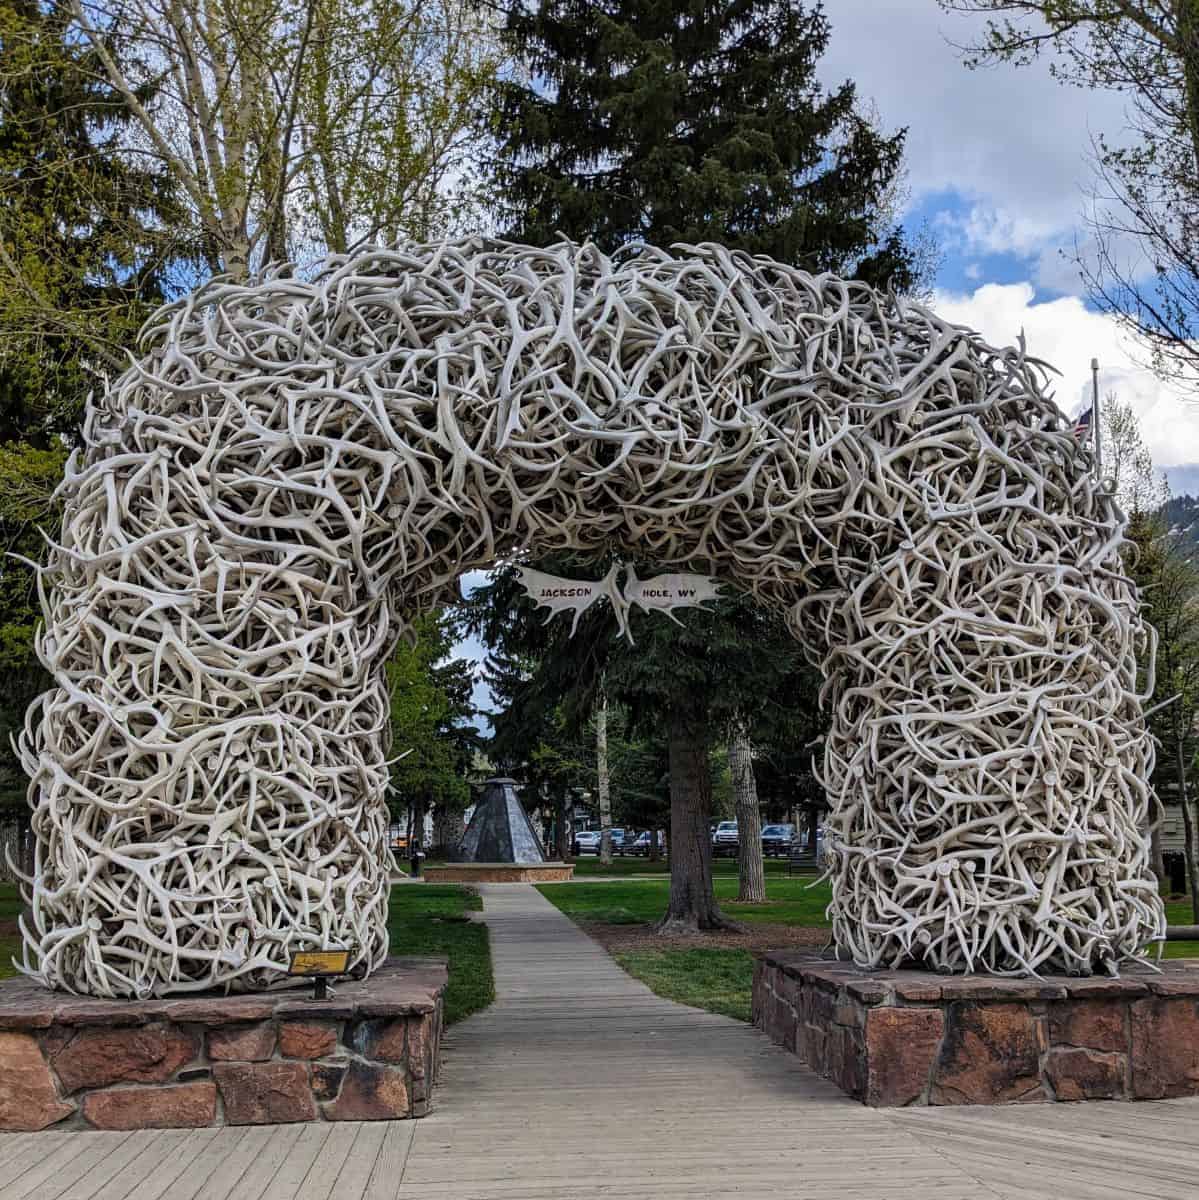 Large archway made of white elk antlers on a stone base over a wooden walkway at a town square.